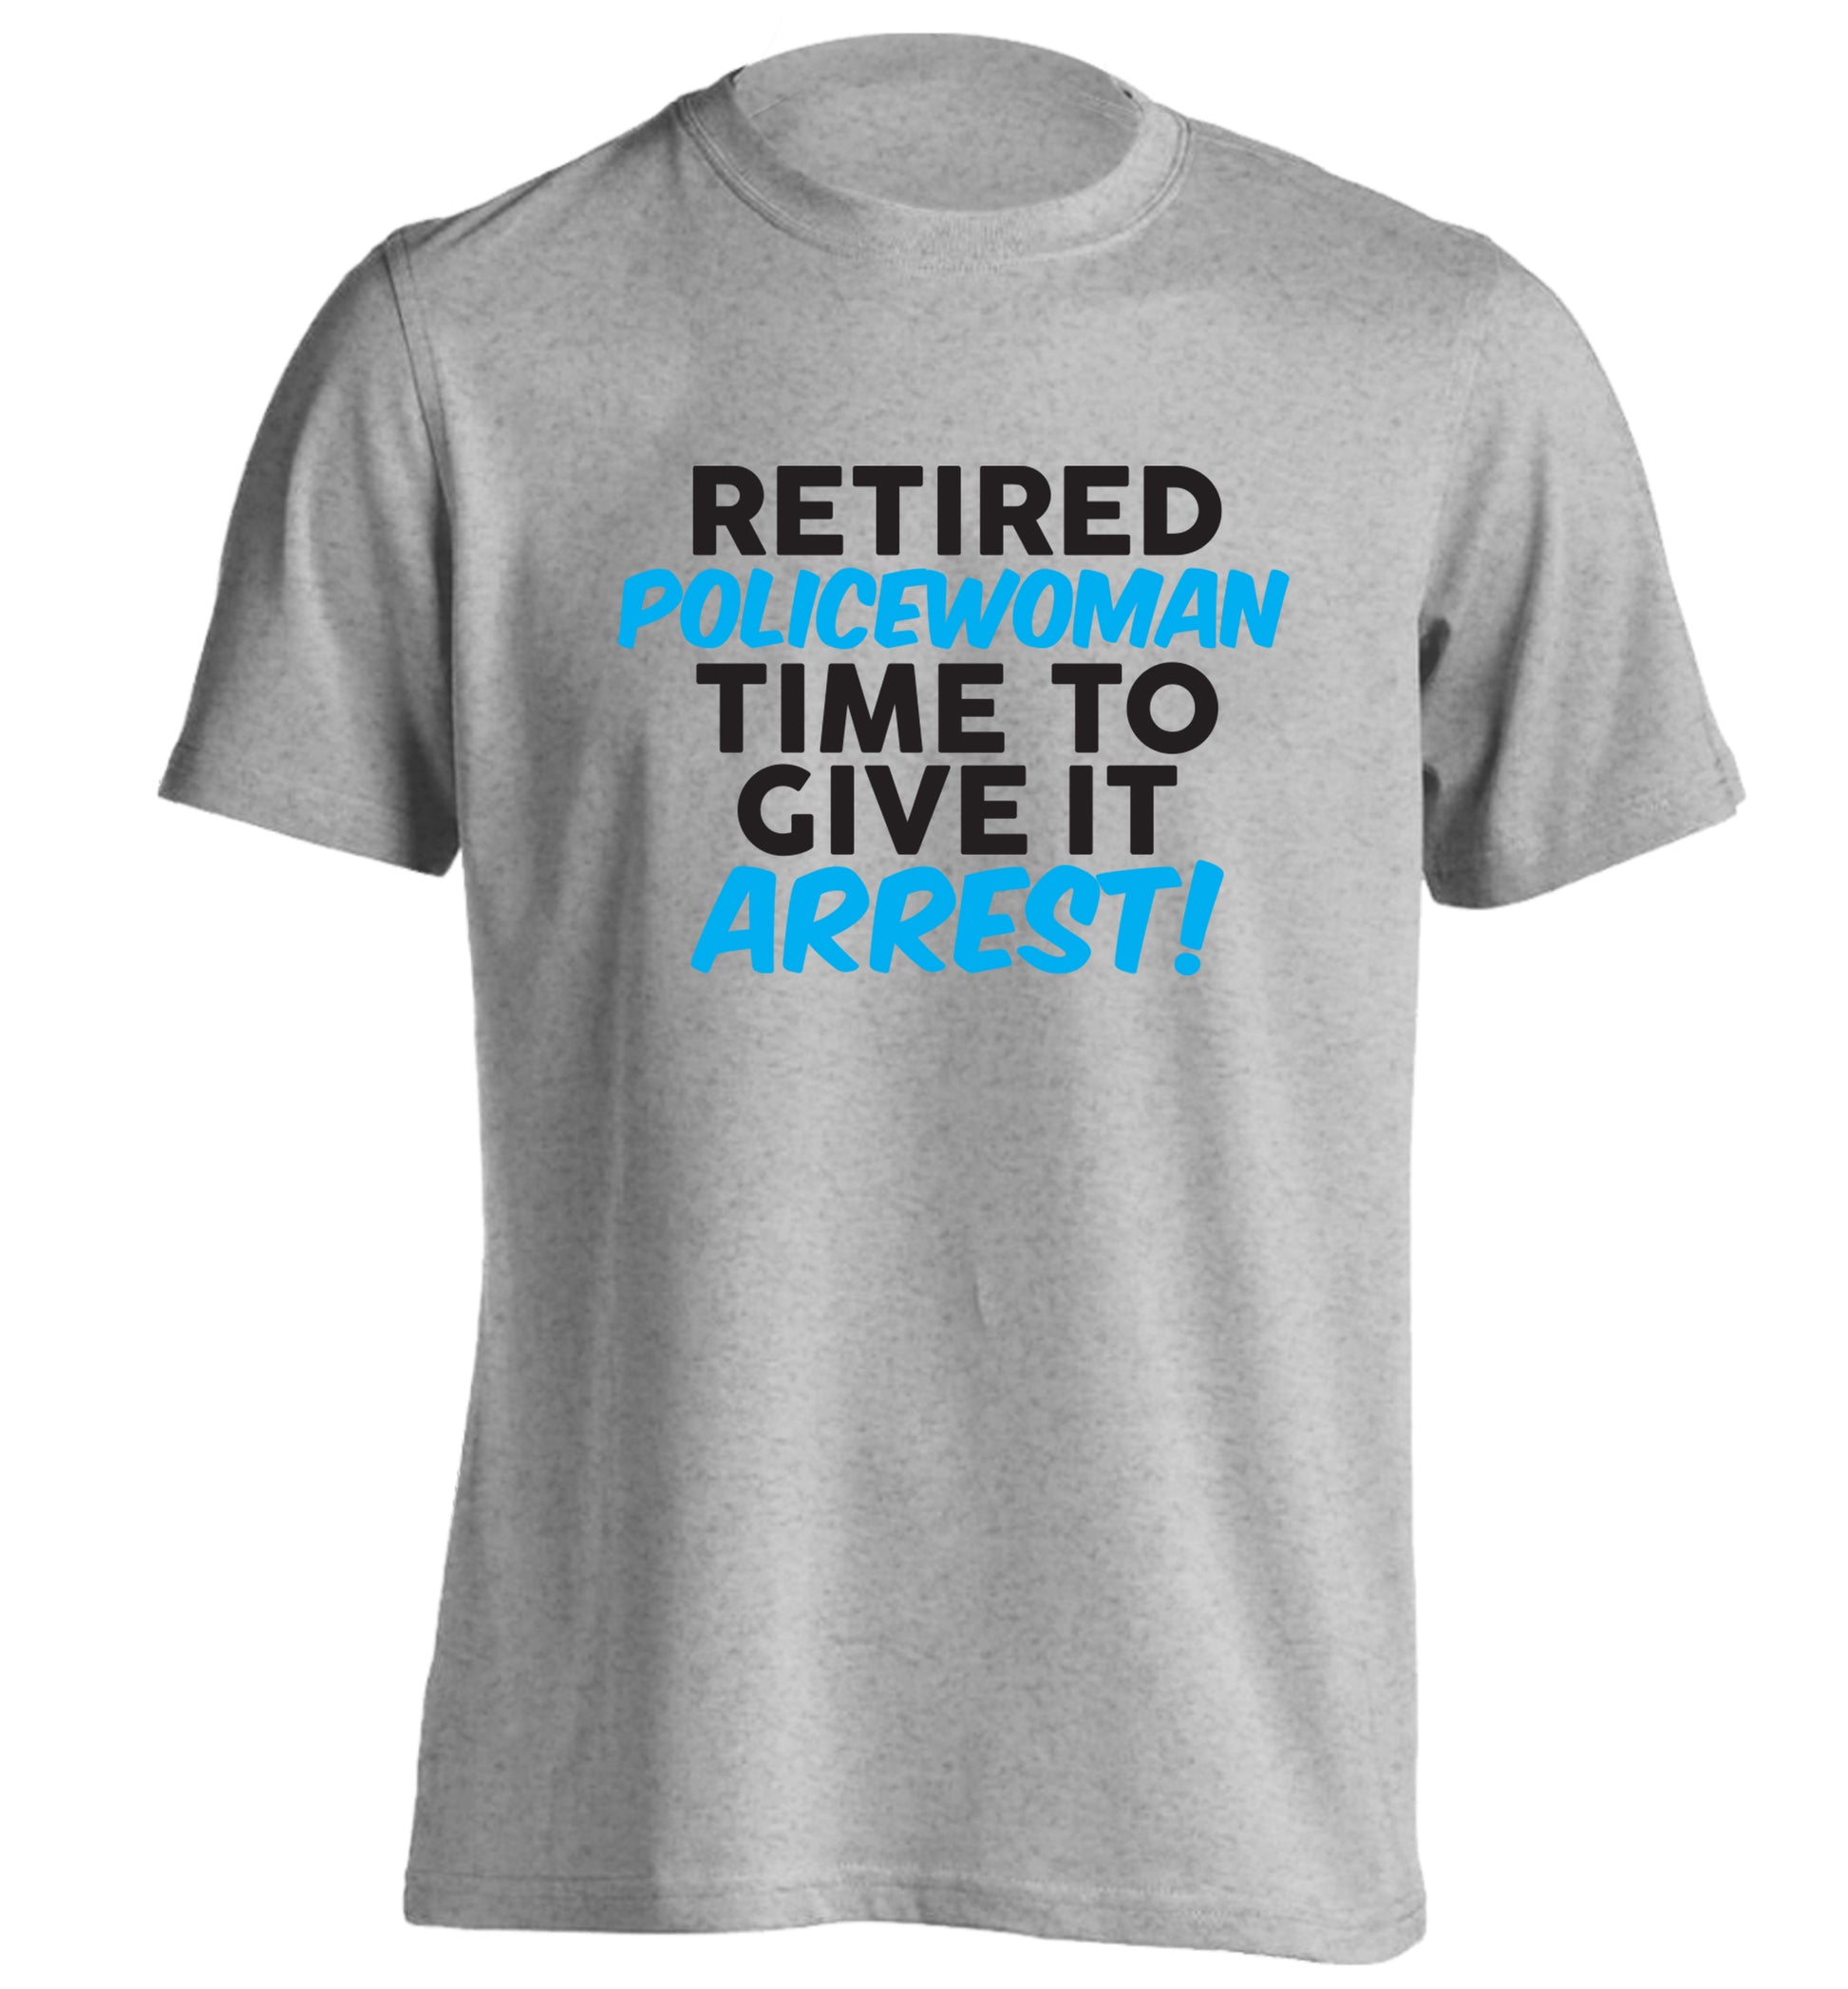 Retired policewoman time to give it arrest adults unisex grey Tshirt 2XL